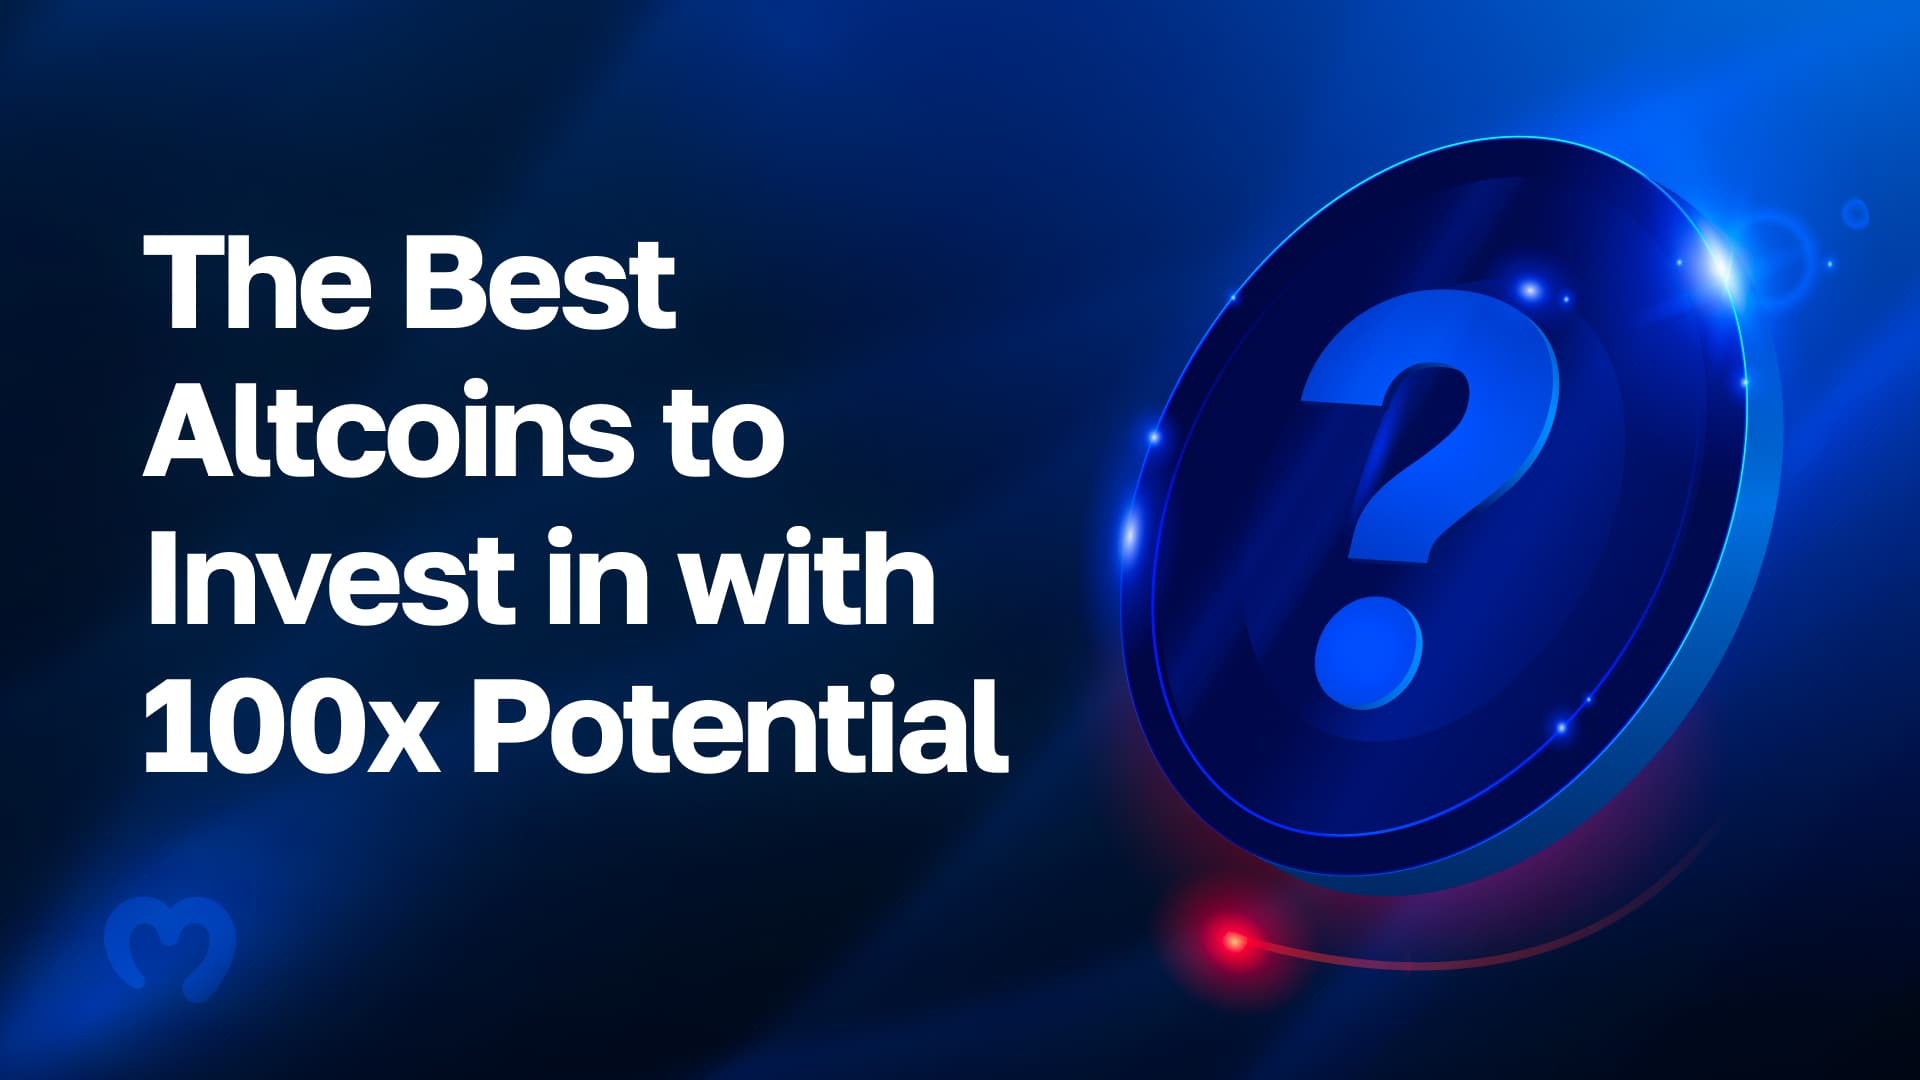 The Best Altcoins to Invest in with 100x Potential